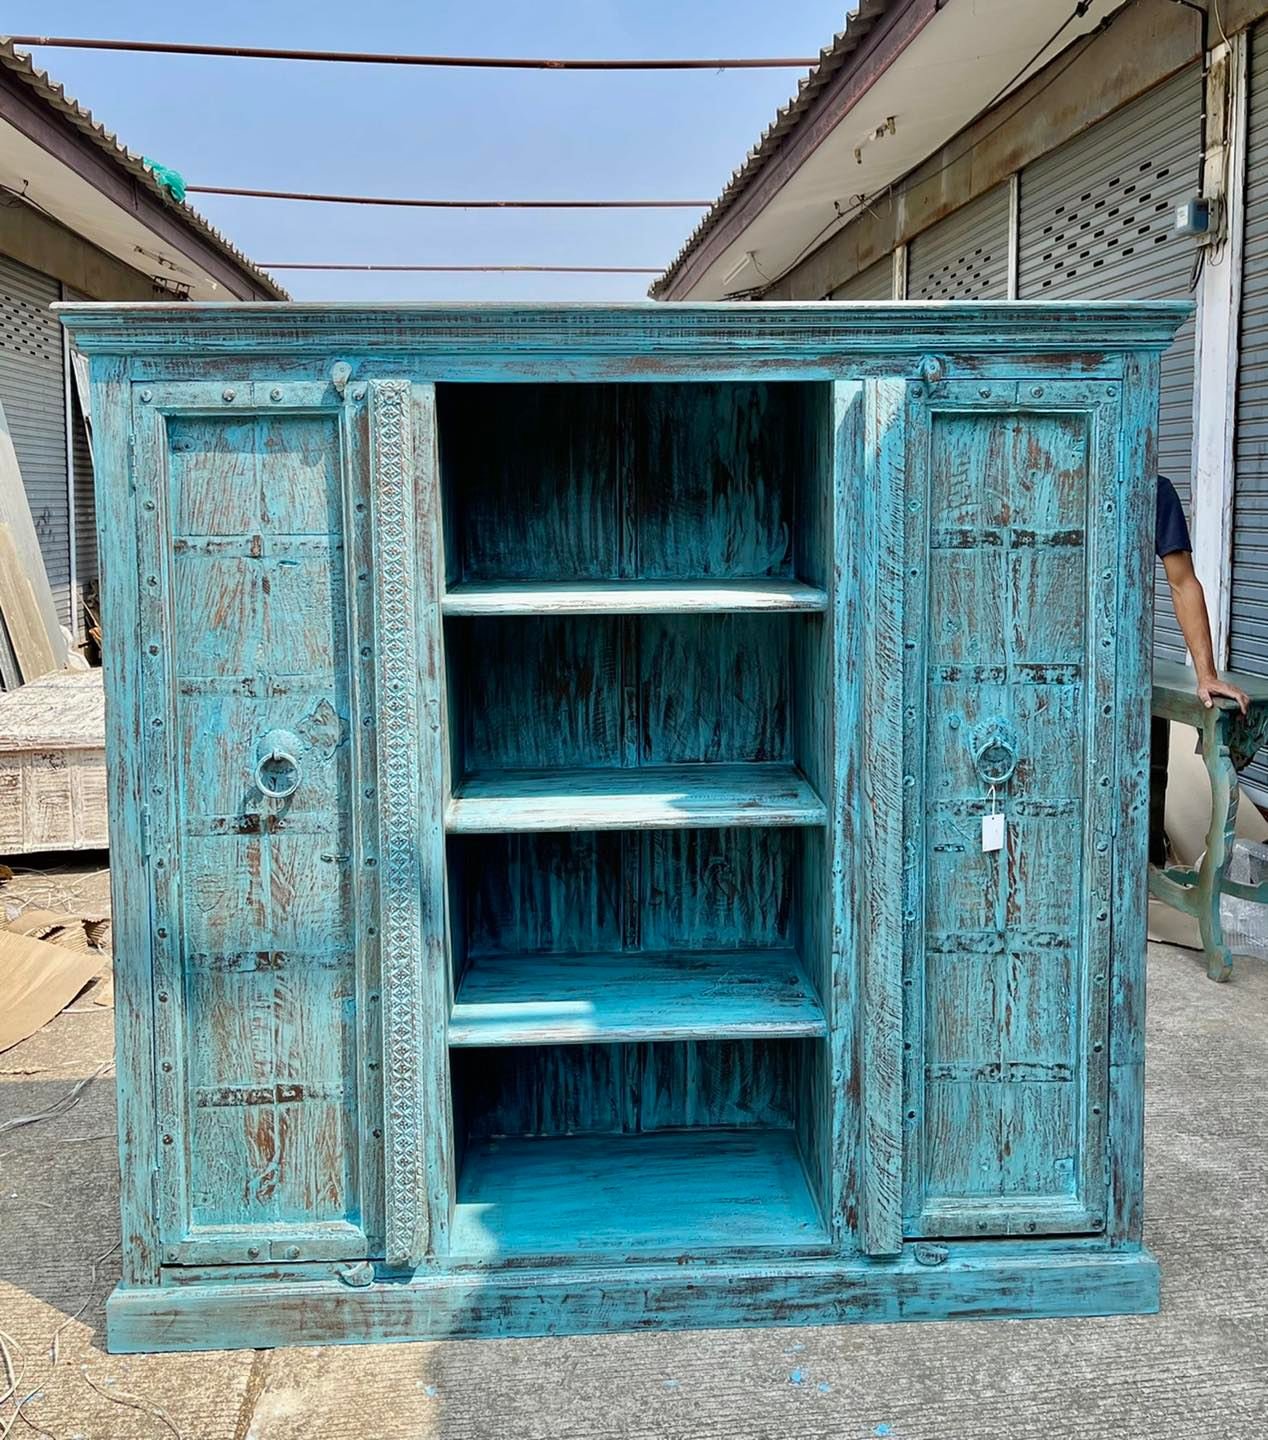 CTXL2 Antique Display Cabinet in Blue